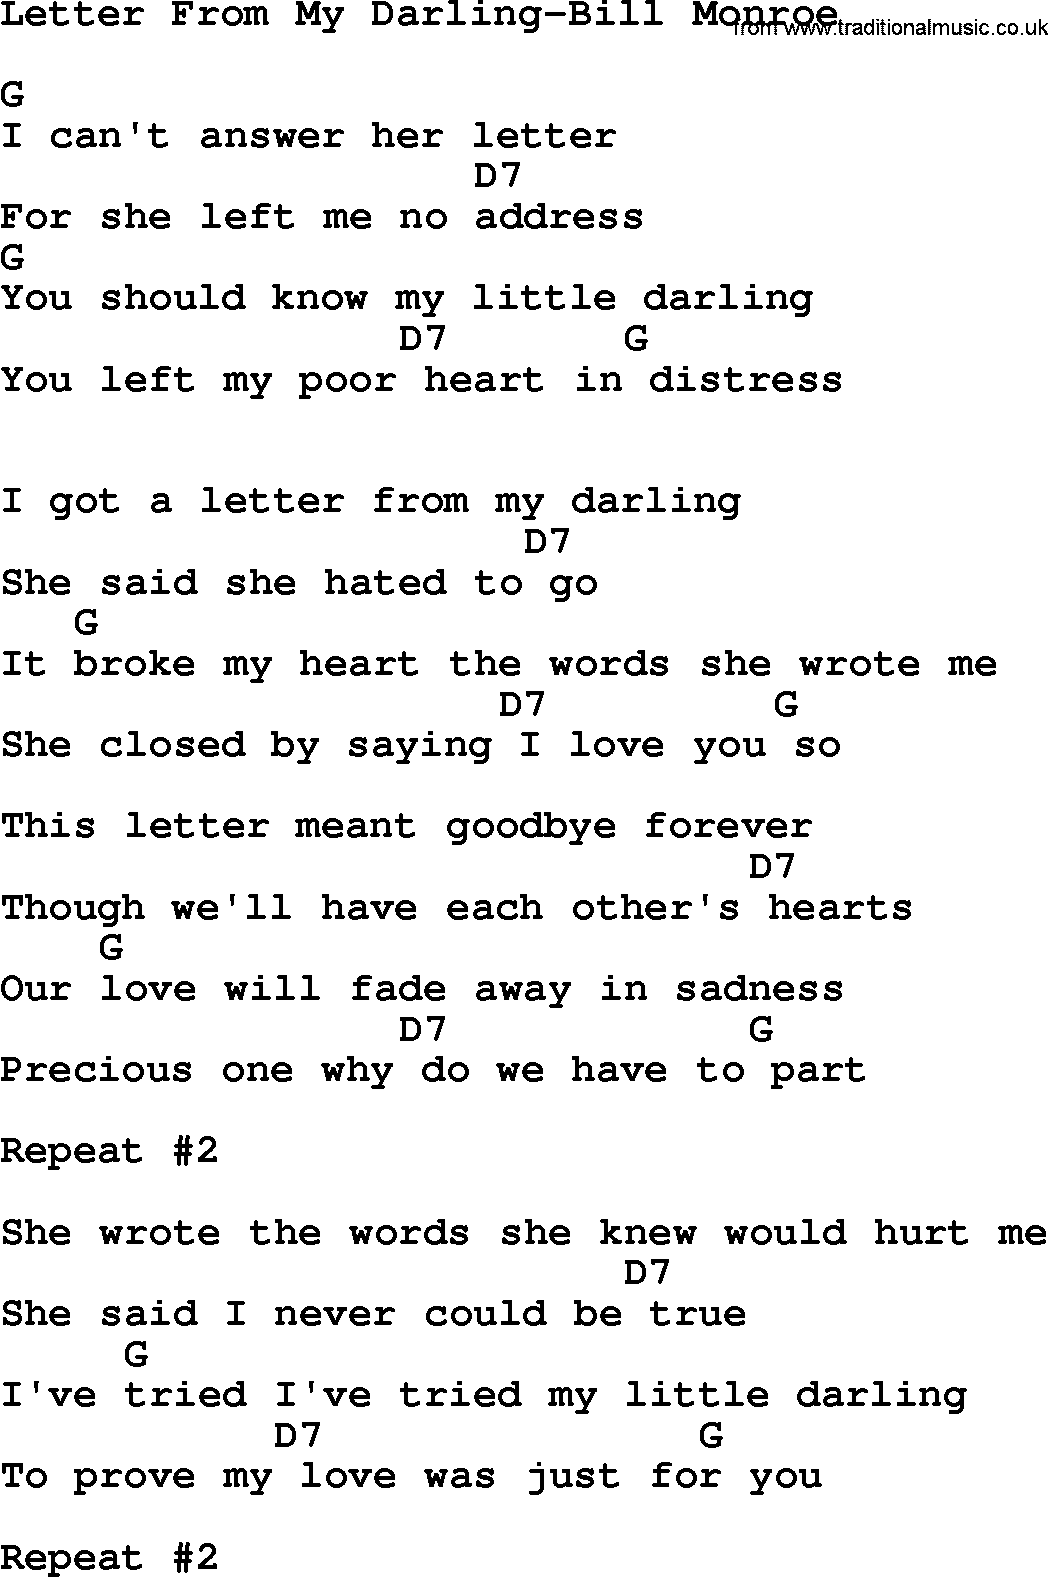 Country music song: Letter From My Darling-Bill Monroe lyrics and chords